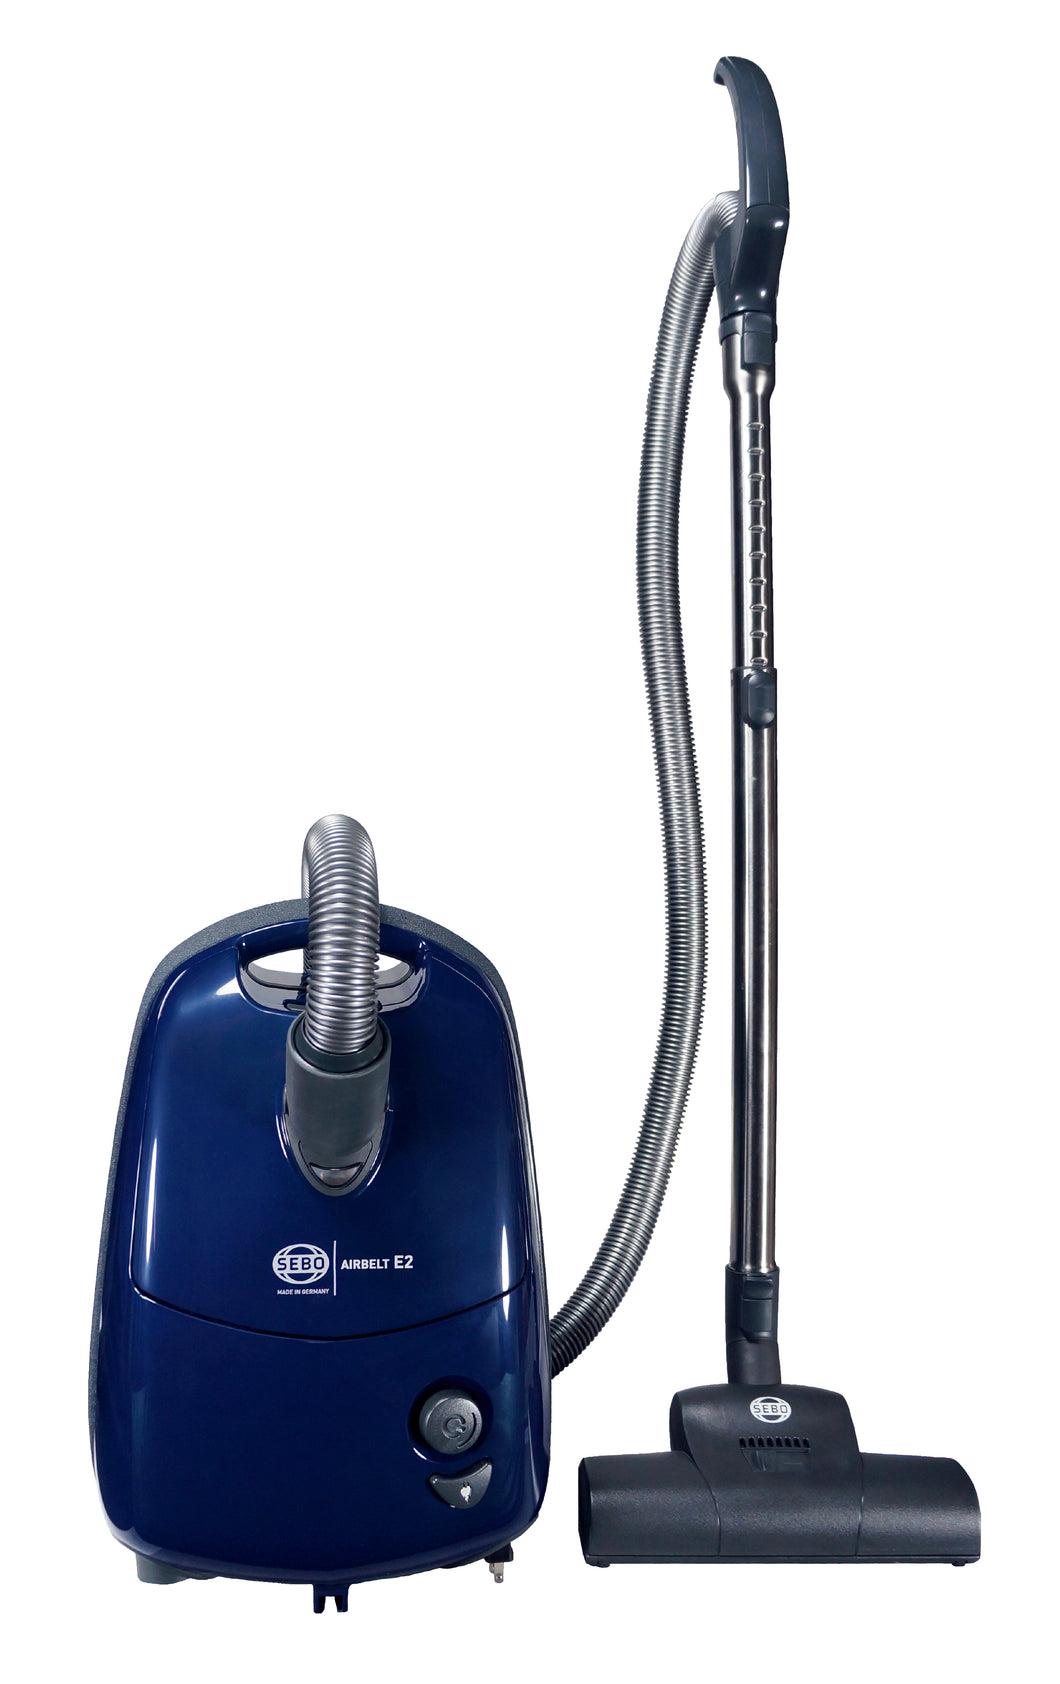 Sebo Airbelt E2 Turbo with turbo nozzle and parquet brush.  Includes Three-Step Hospital Grade Filtration